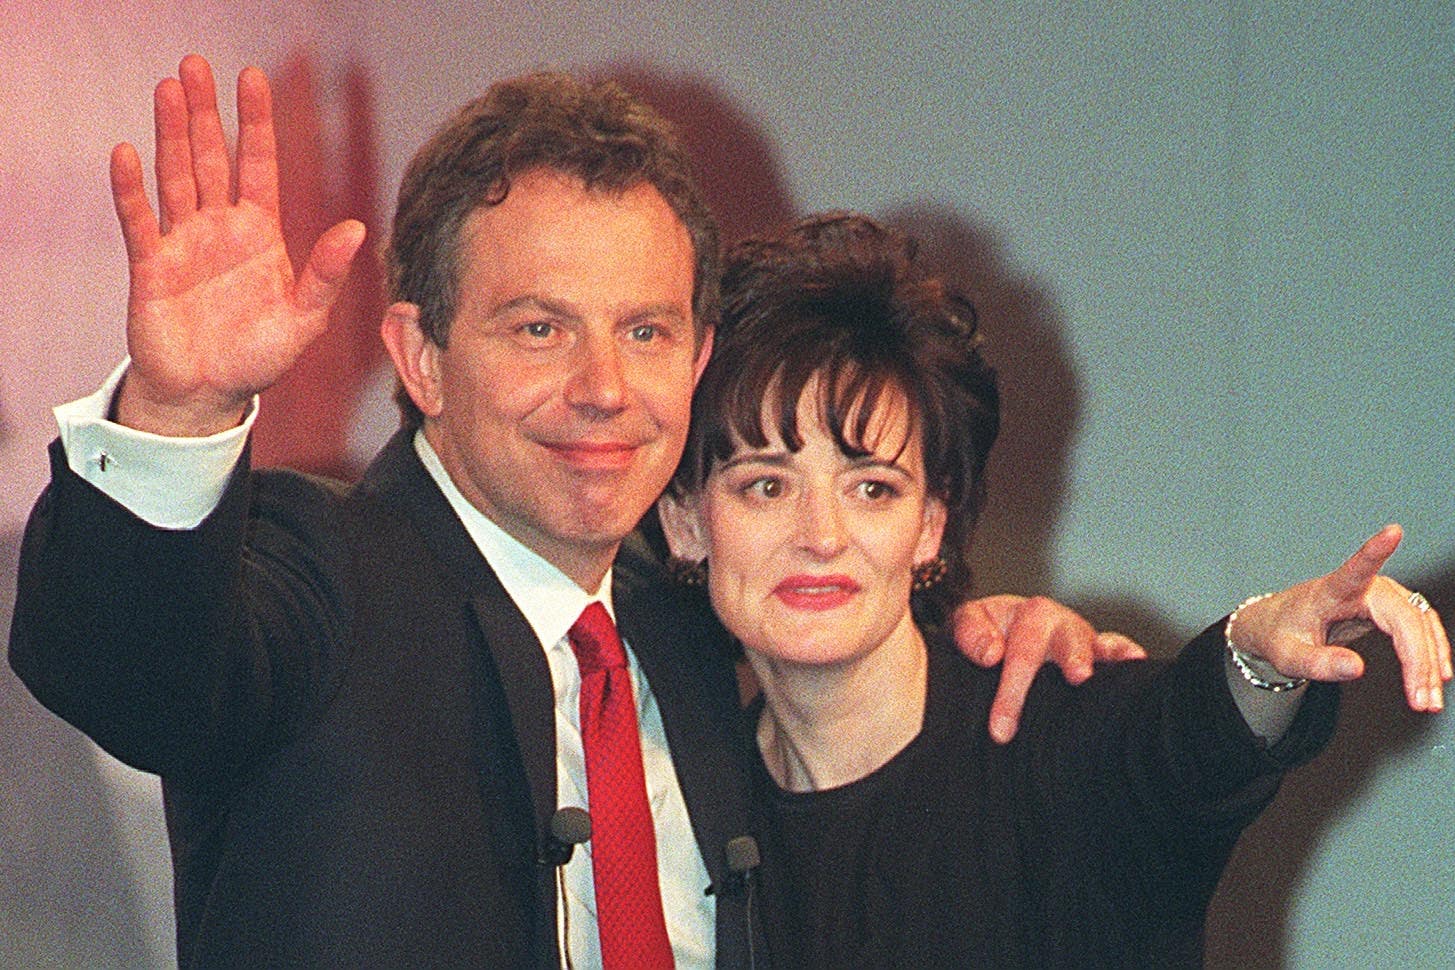 Former Labour leader Tony Blair and his wife Cherie pictured in 1997 after winning a landslide election victory